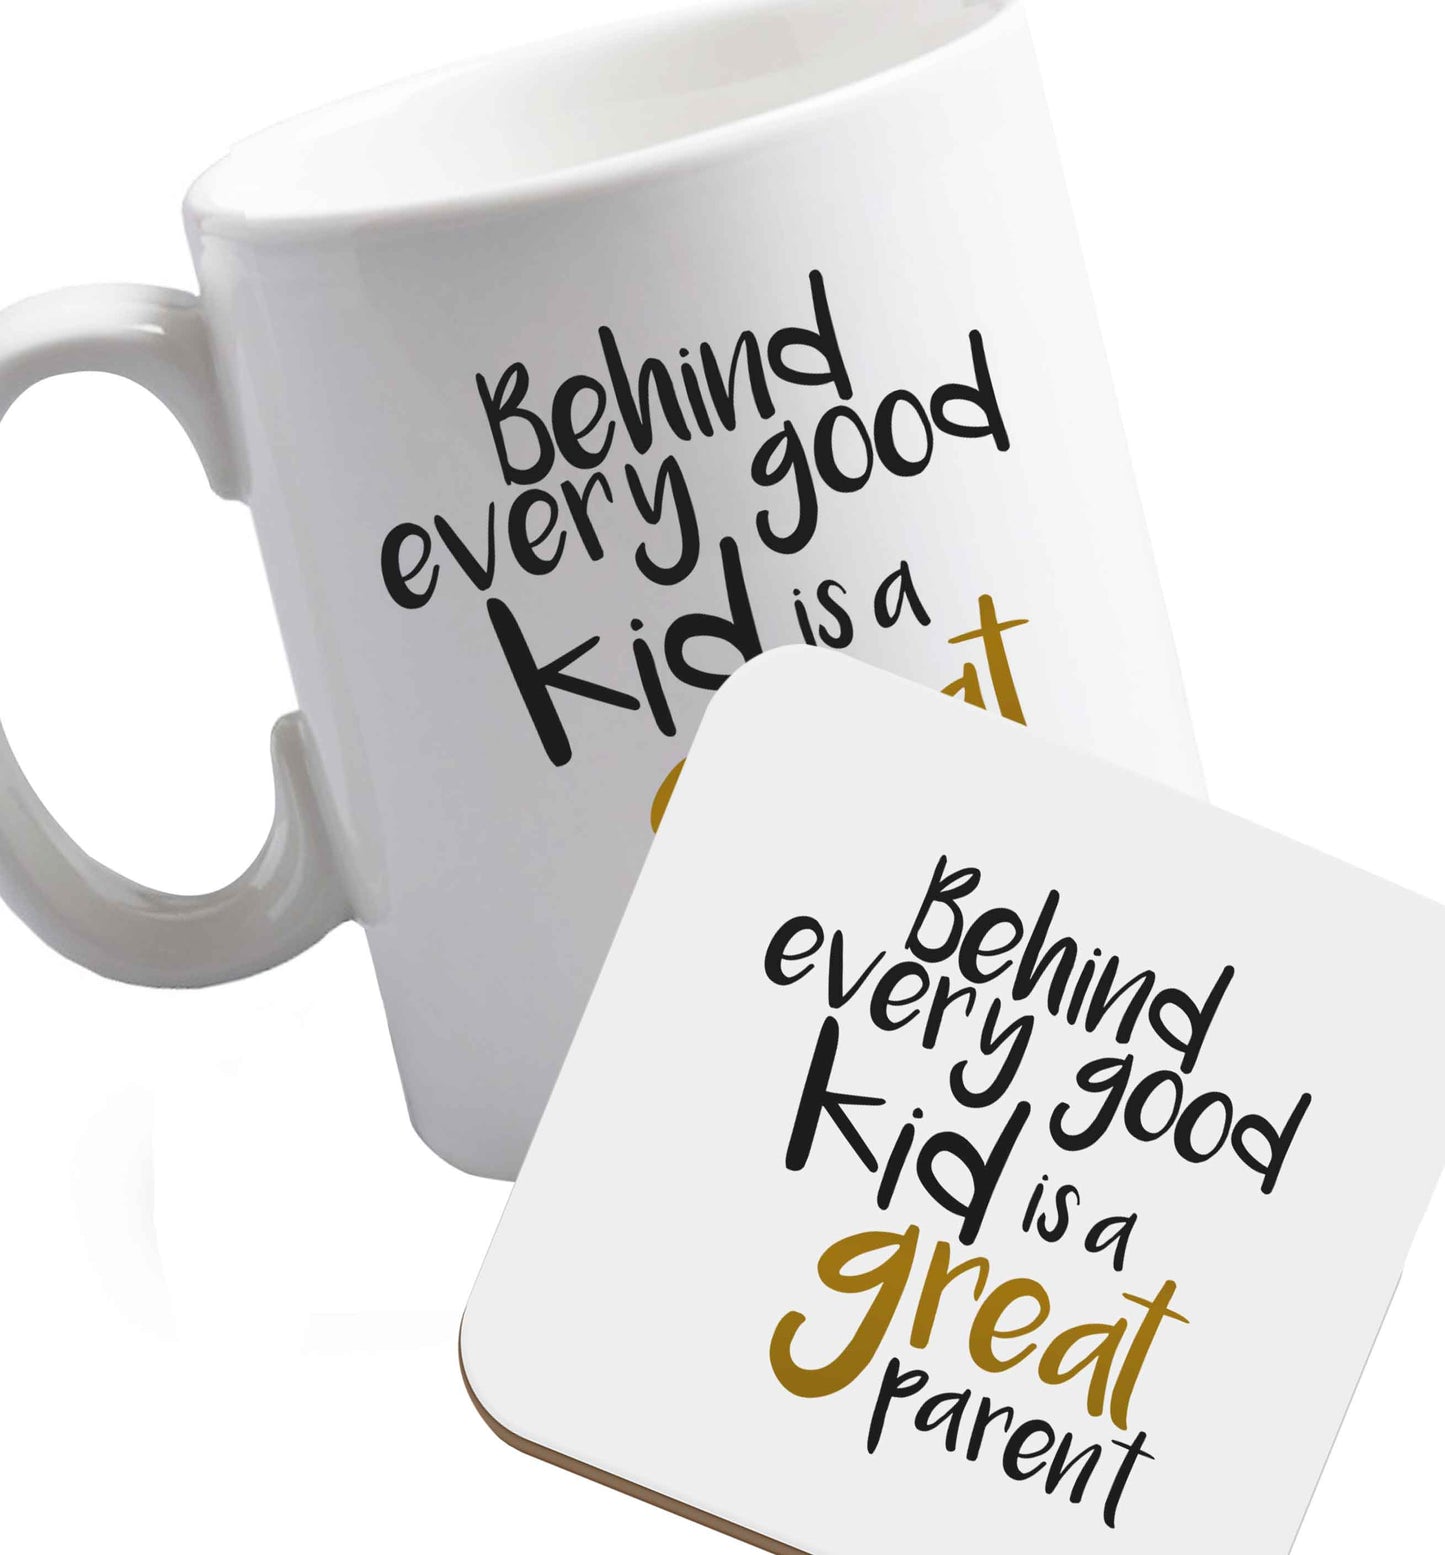 10 oz Behind every good kid is a great parent ceramic mug and coaster set right handed